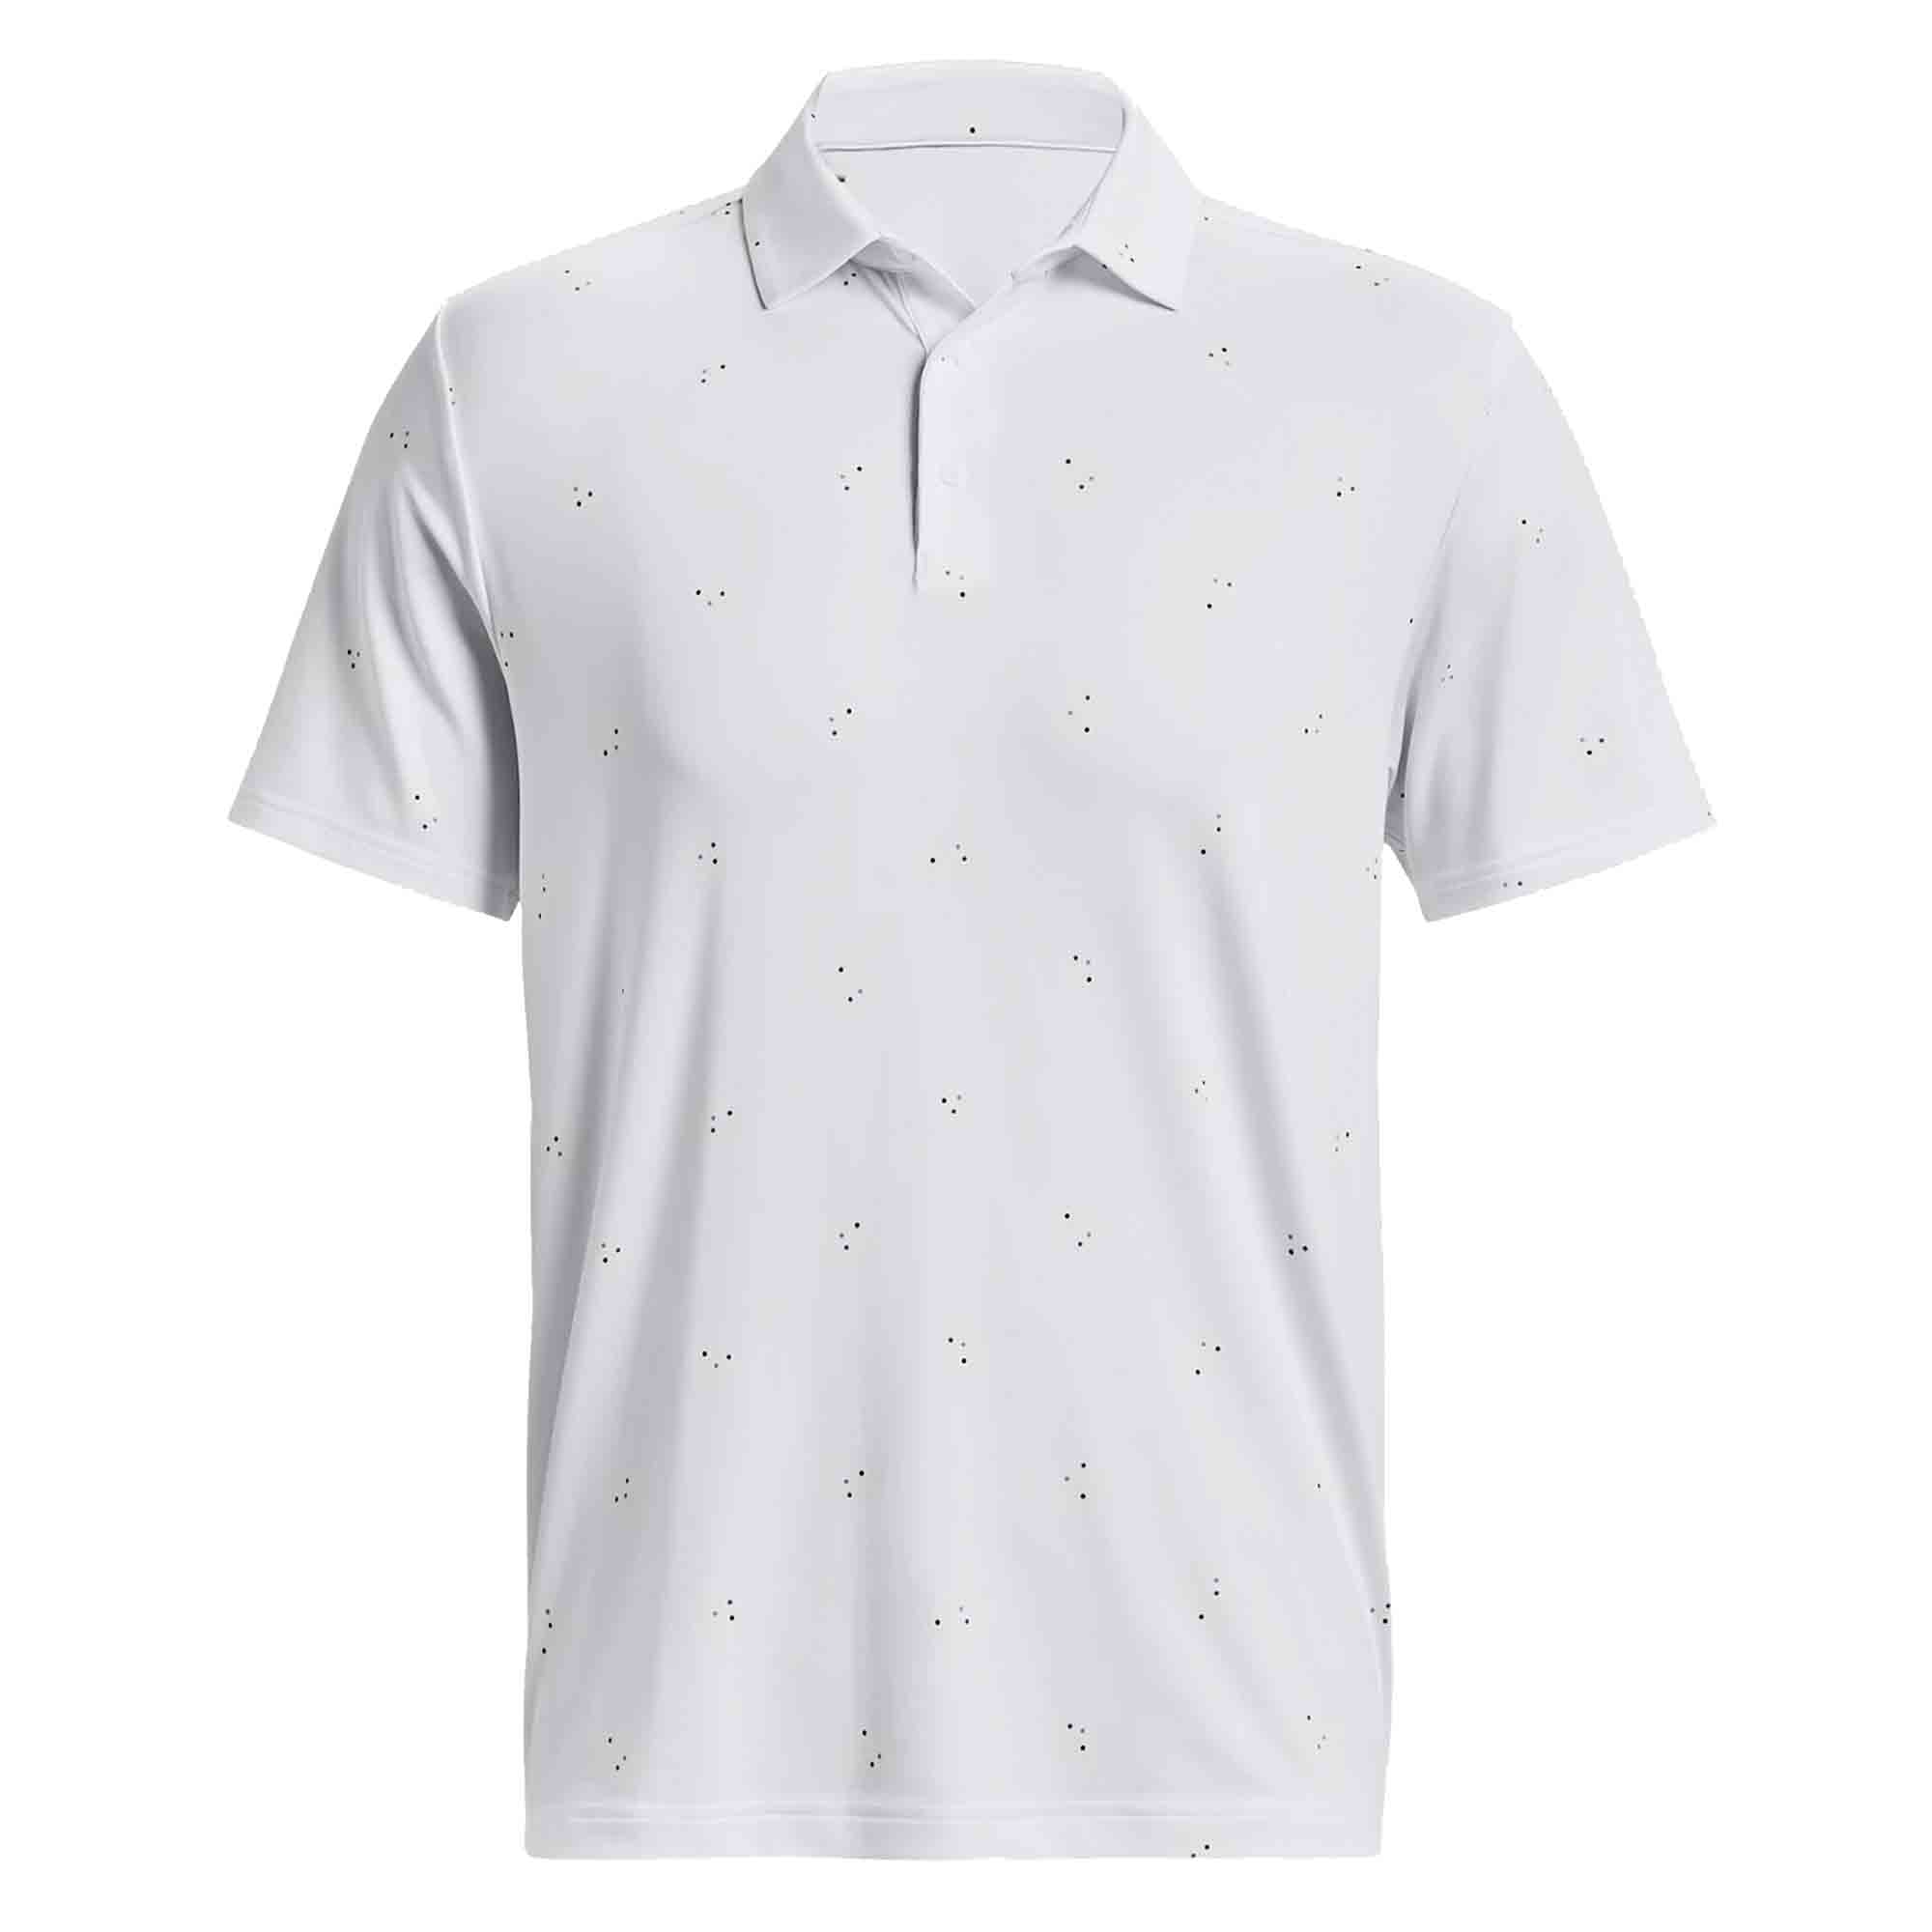 Under Armour Mens Playoff 3.0 Printed Golf Polo Shirt  - White/Static Blue